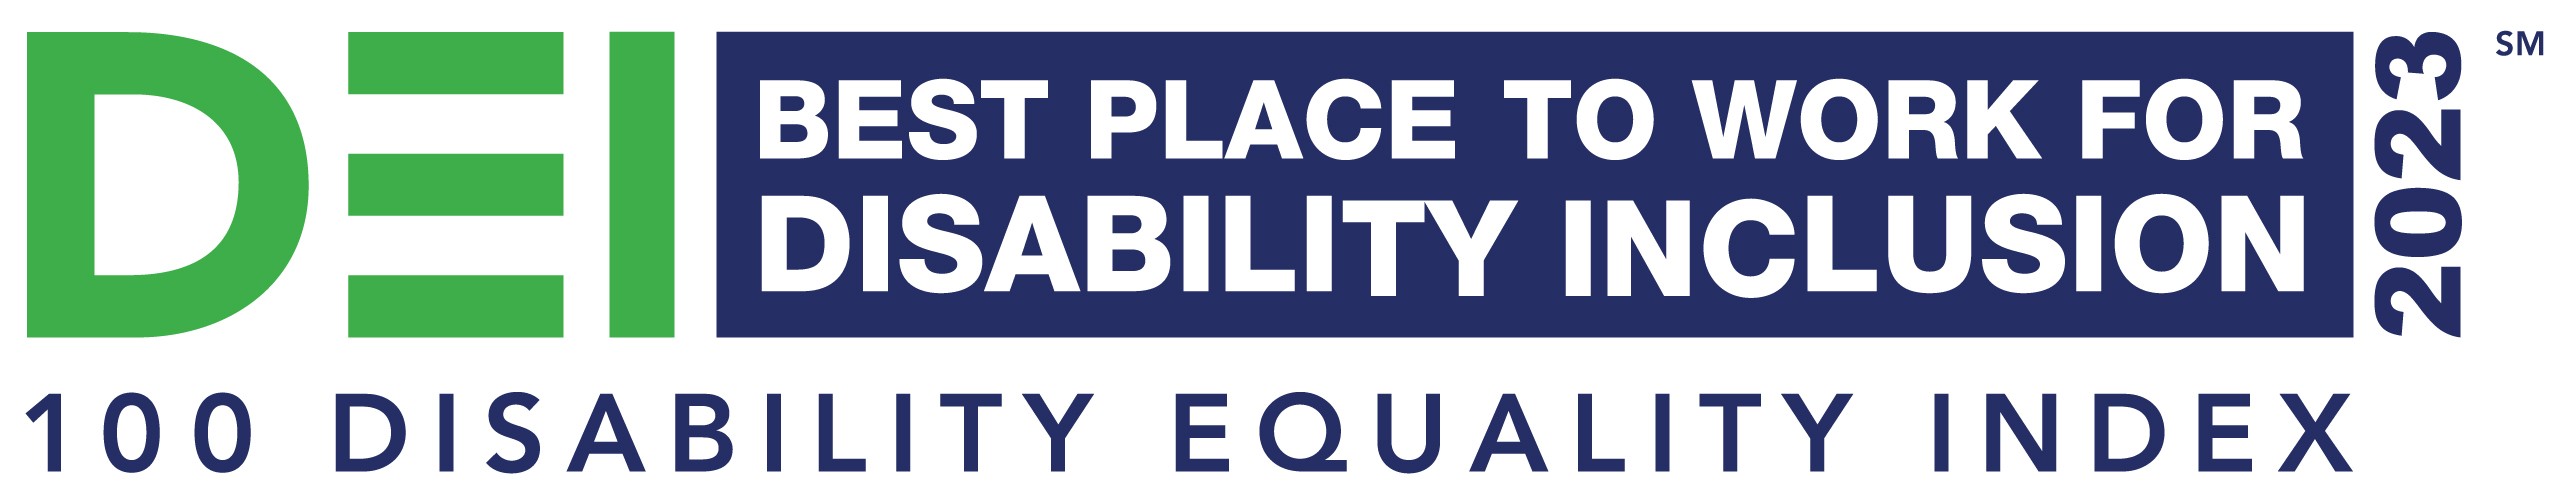 Best Place to work for disability inclusion